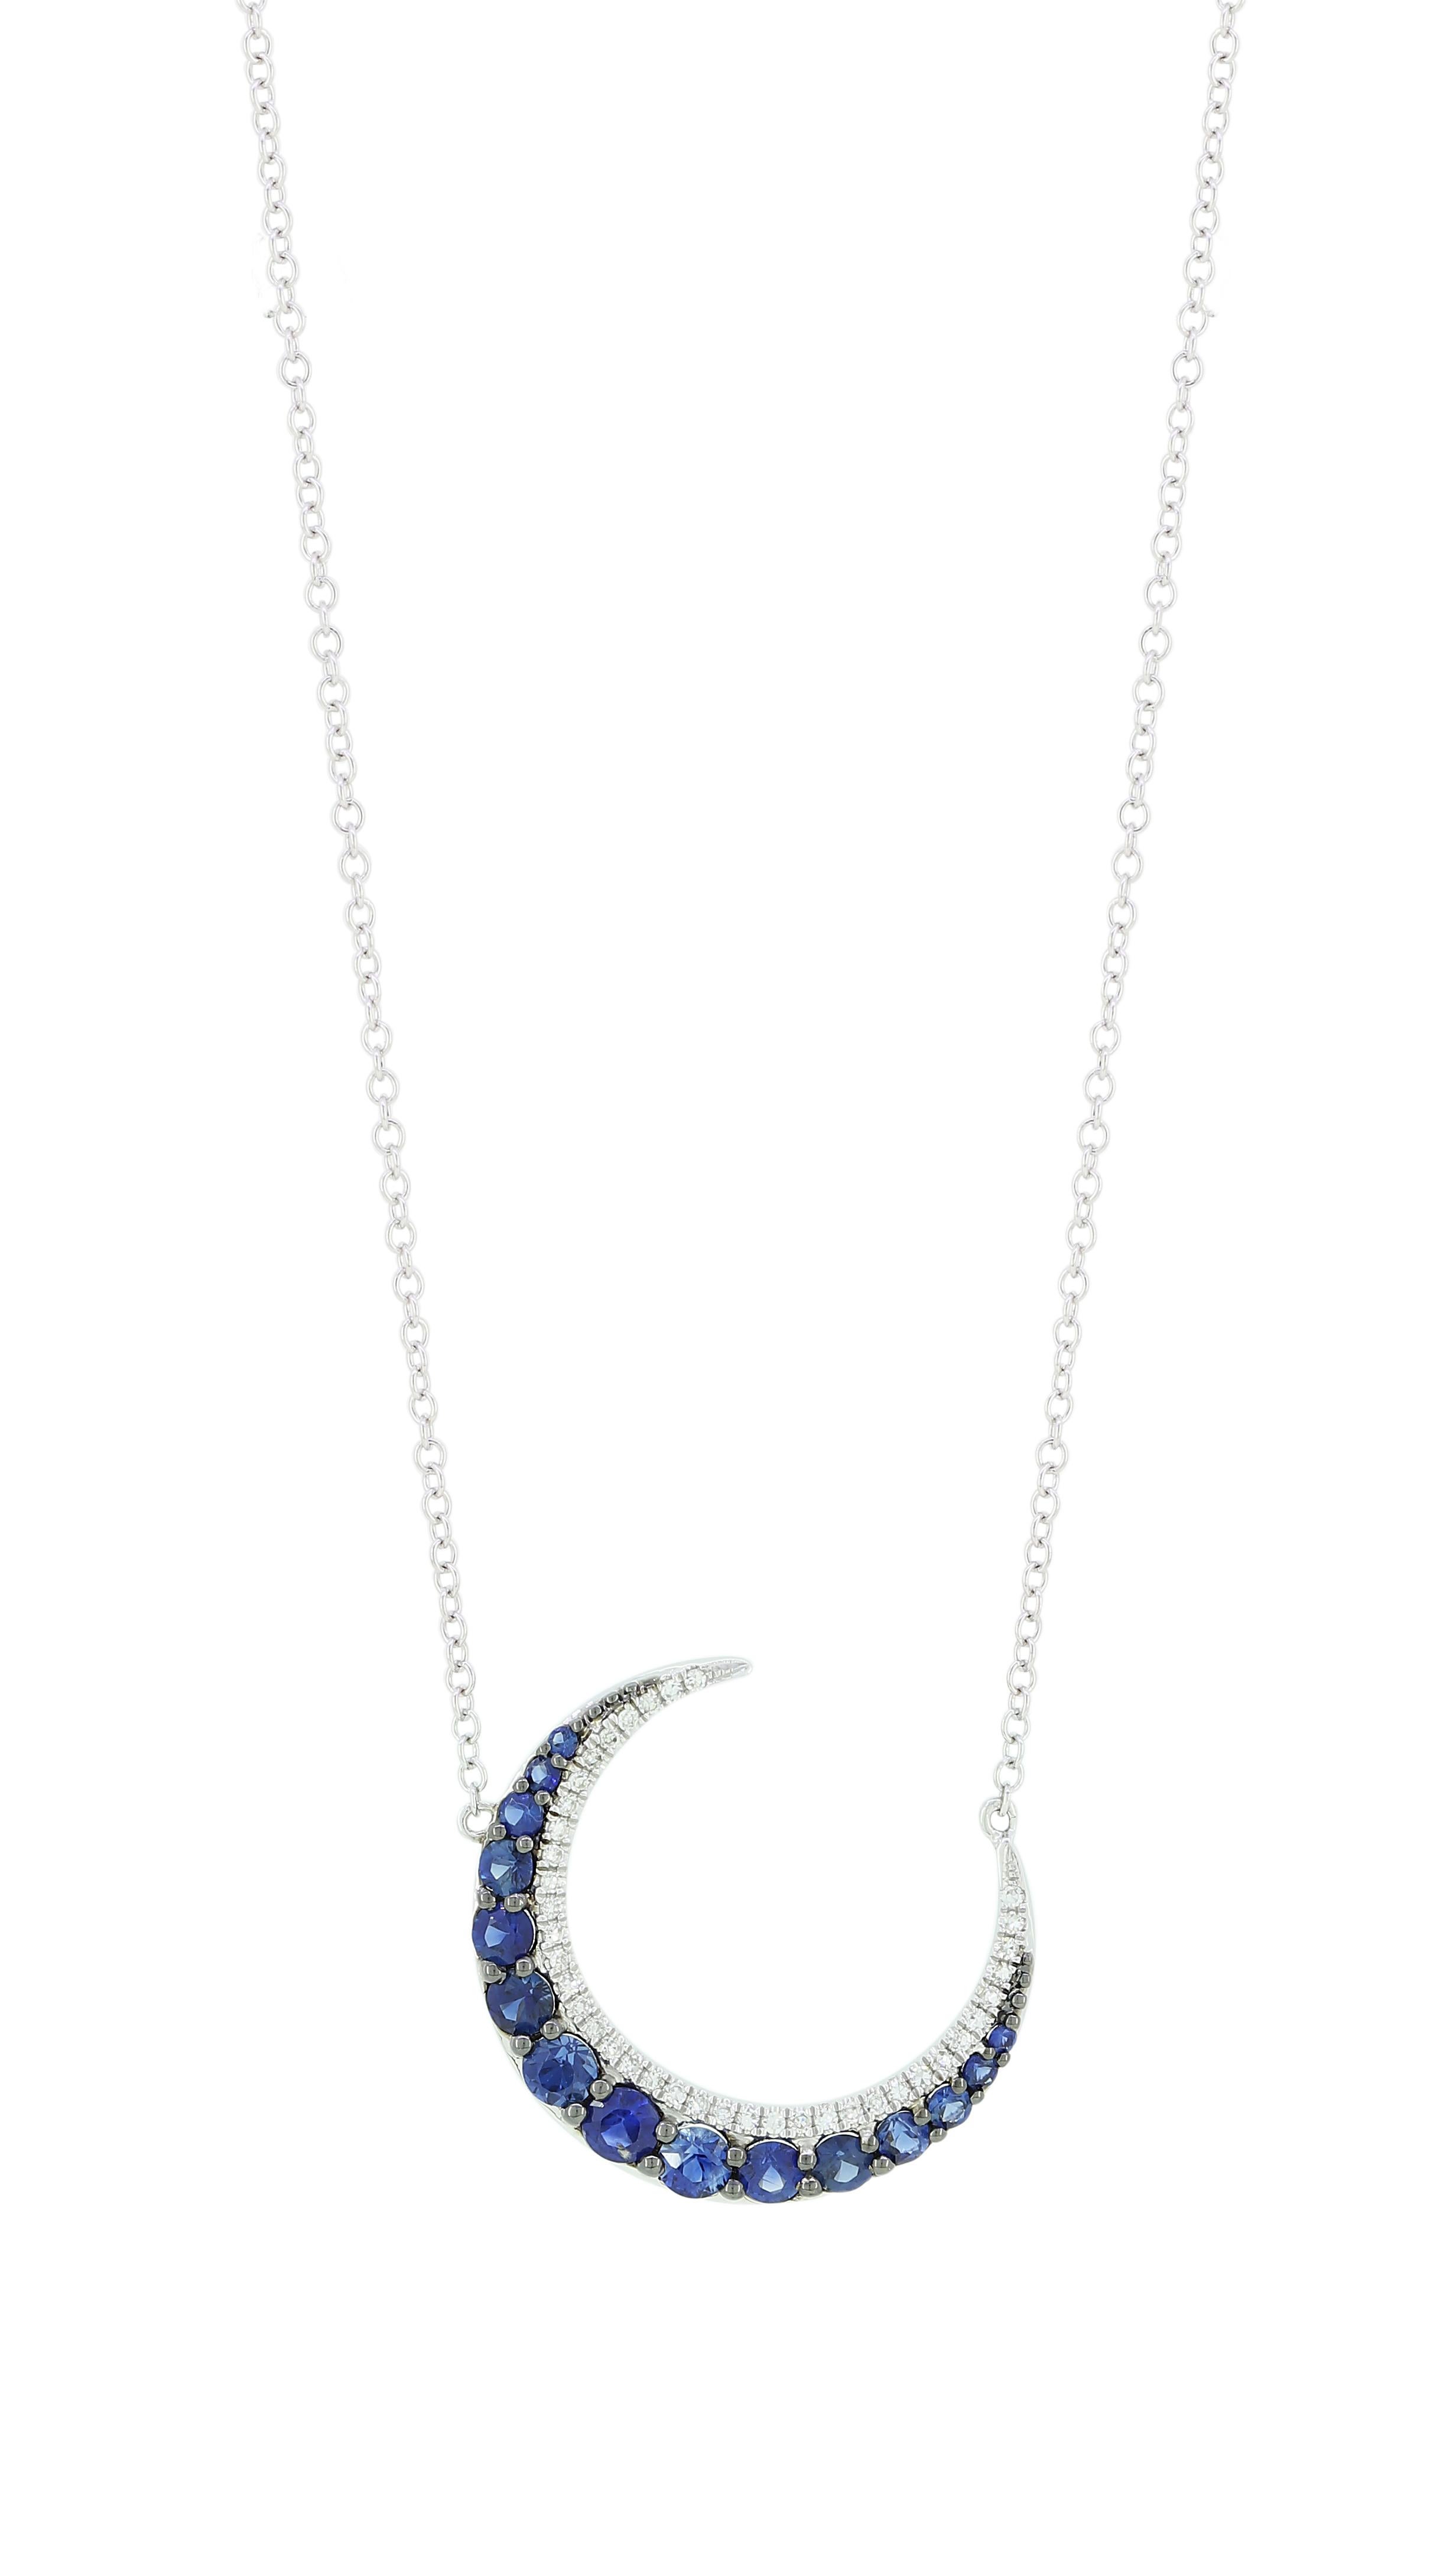 Modern Gemistry .74cttw. Blue Sapphire Pendant Necklace in 14k Gold with Diamond